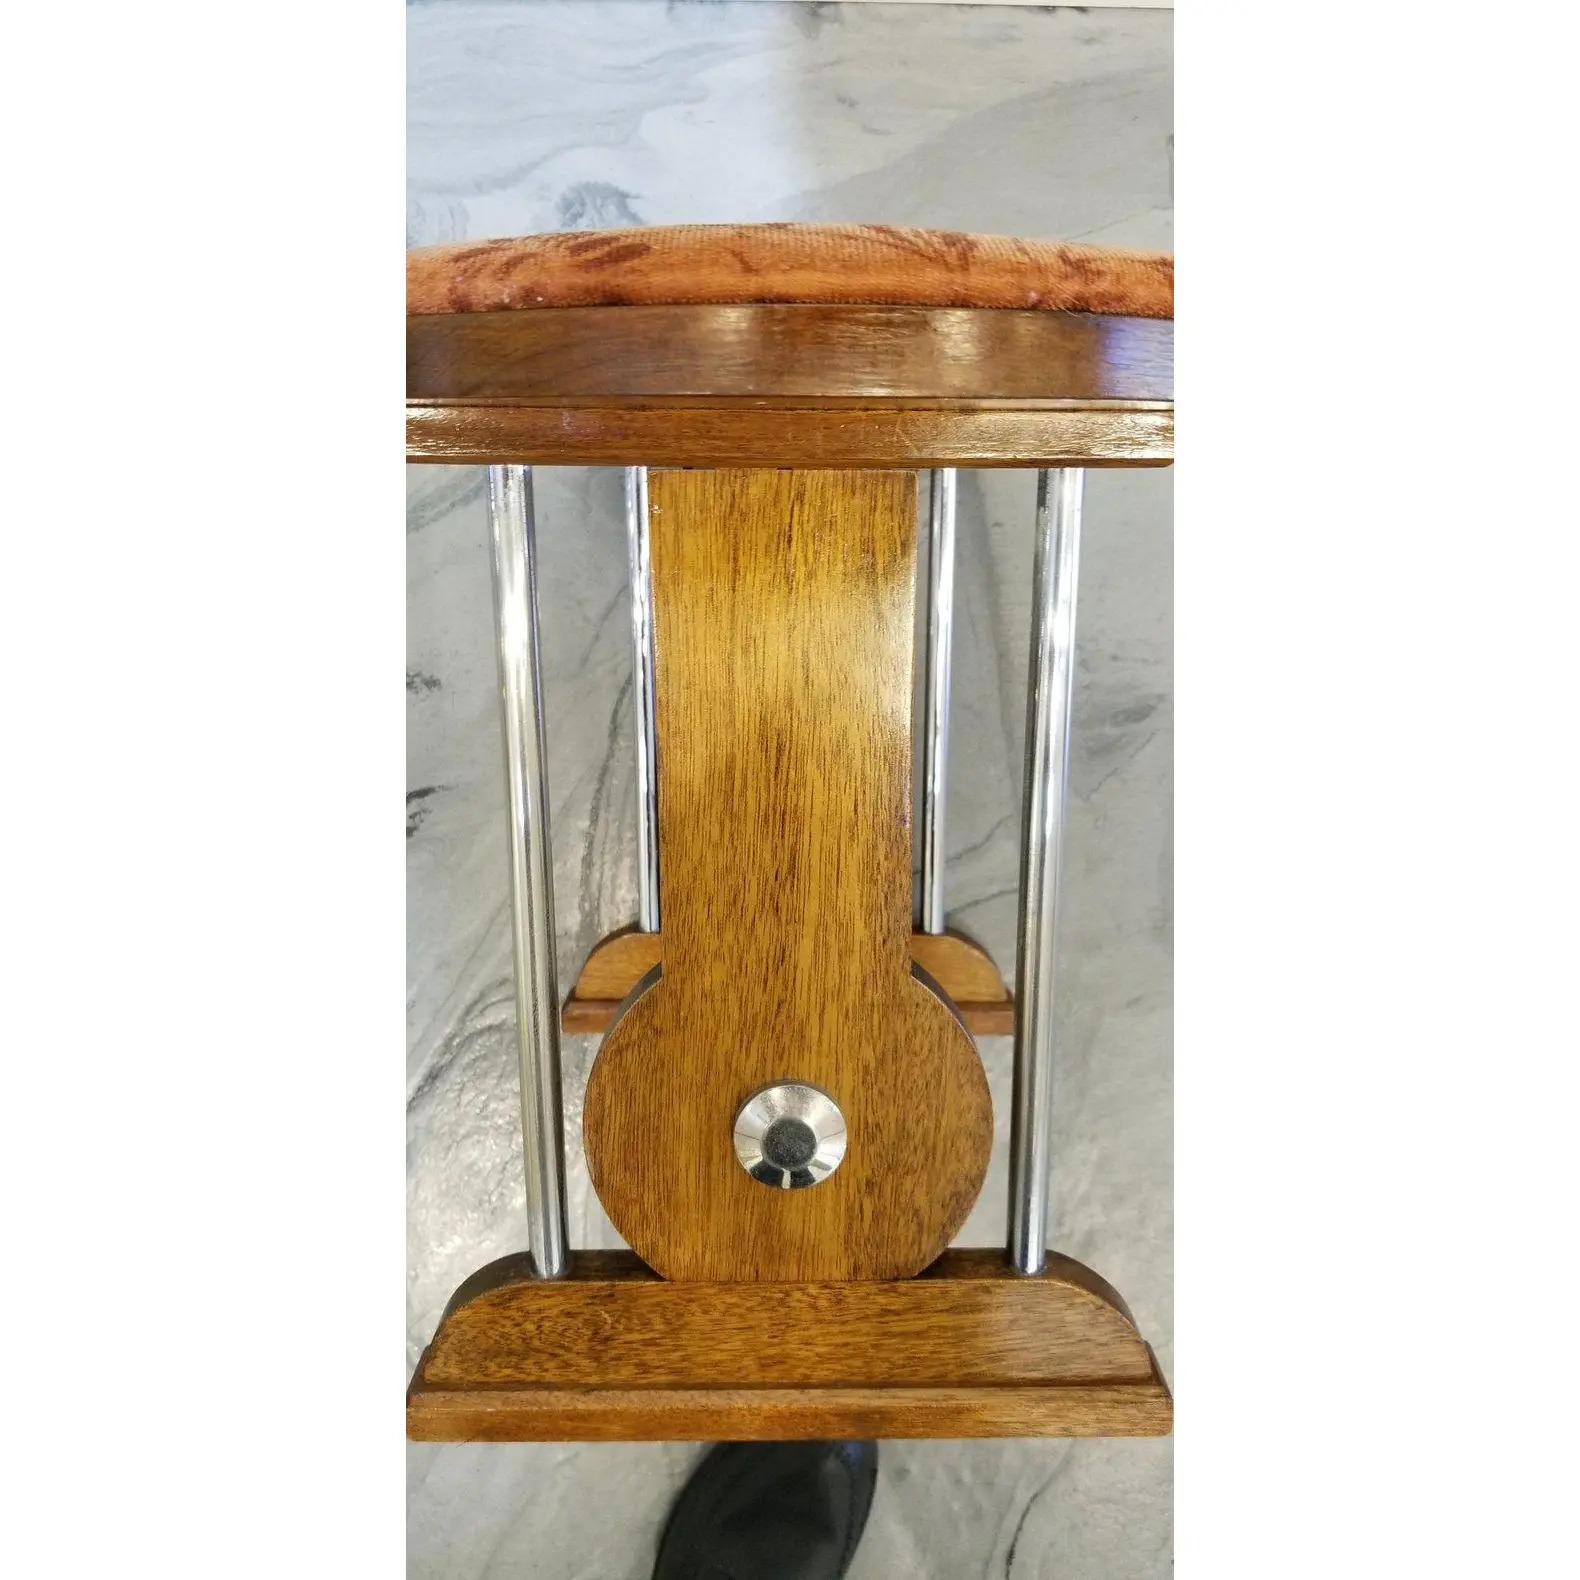 A period Art Deco stool or bench made of solid mahogany with tubular chrome-plated steel detail, Europe, circa 1920s. Excellent original condition.